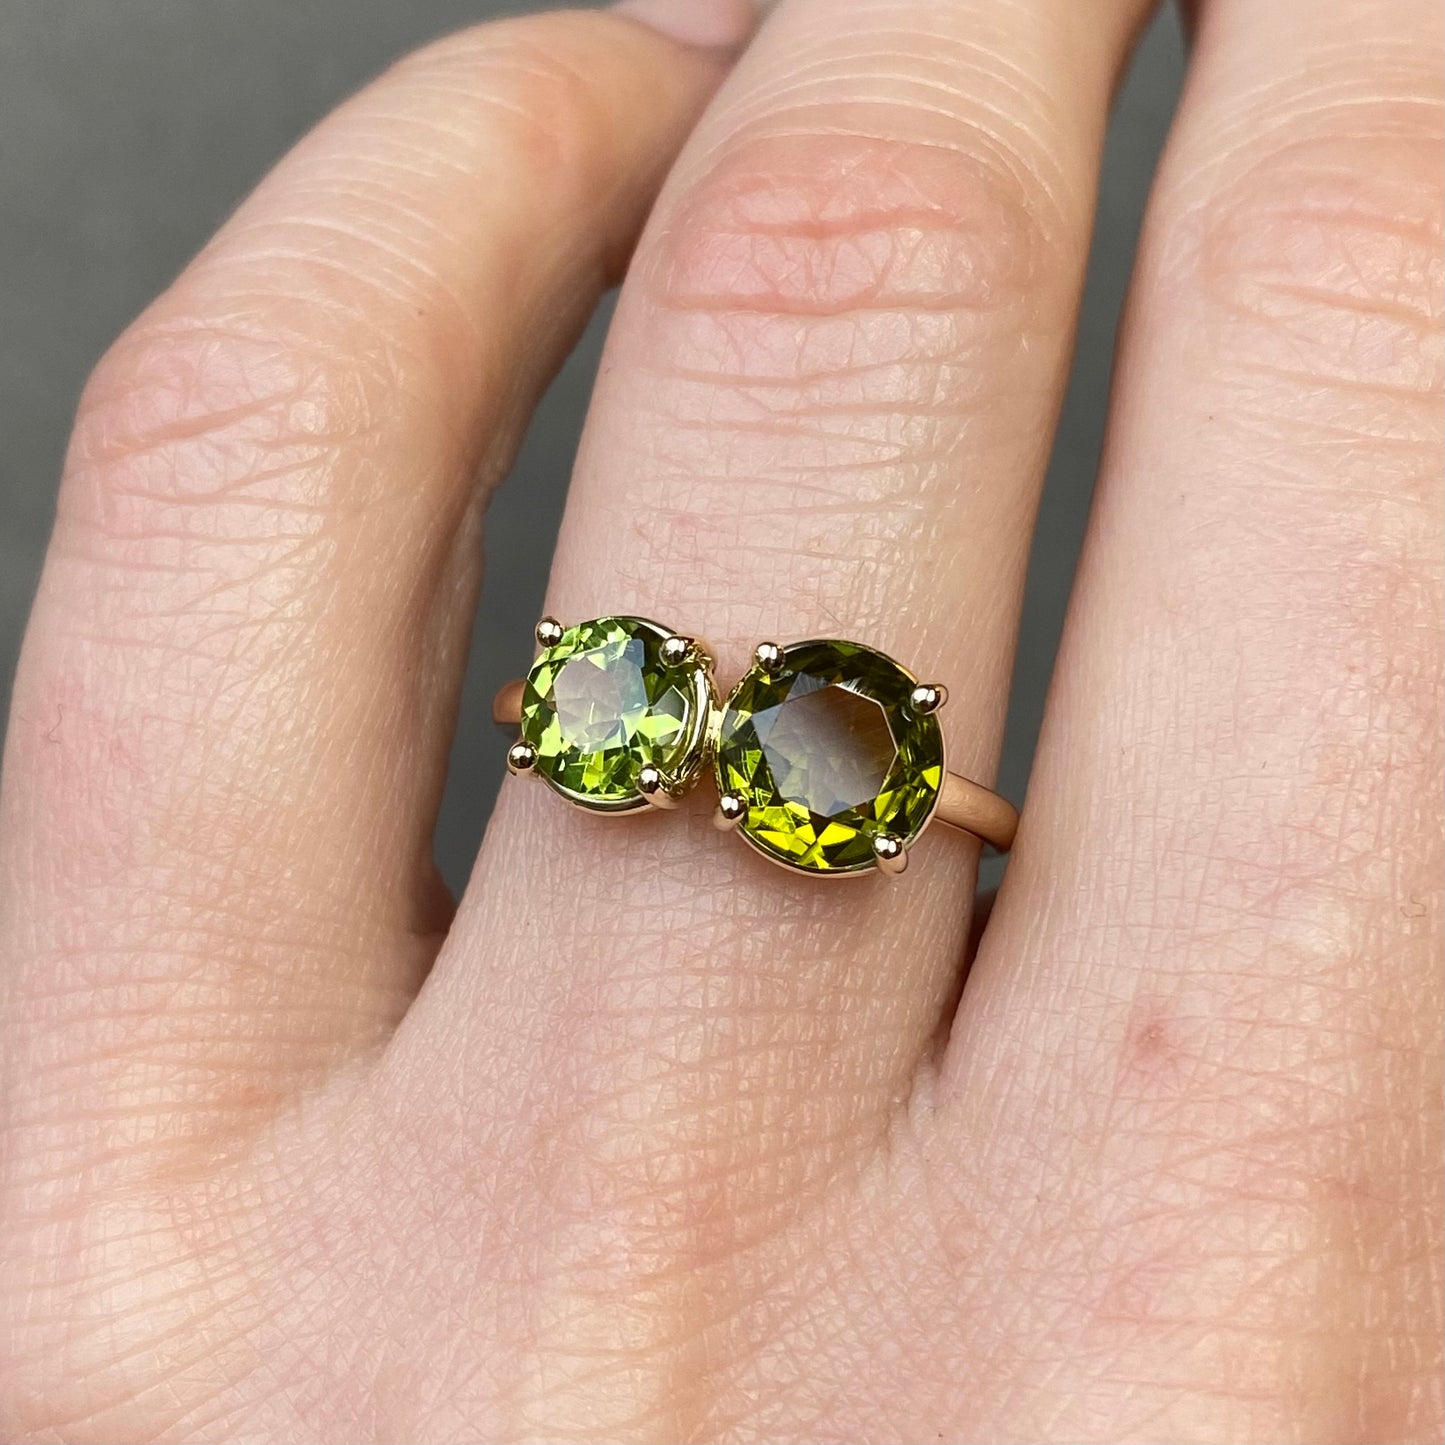 Toi et Moi ring in yellowgold with Green Tourmaline and Peridot